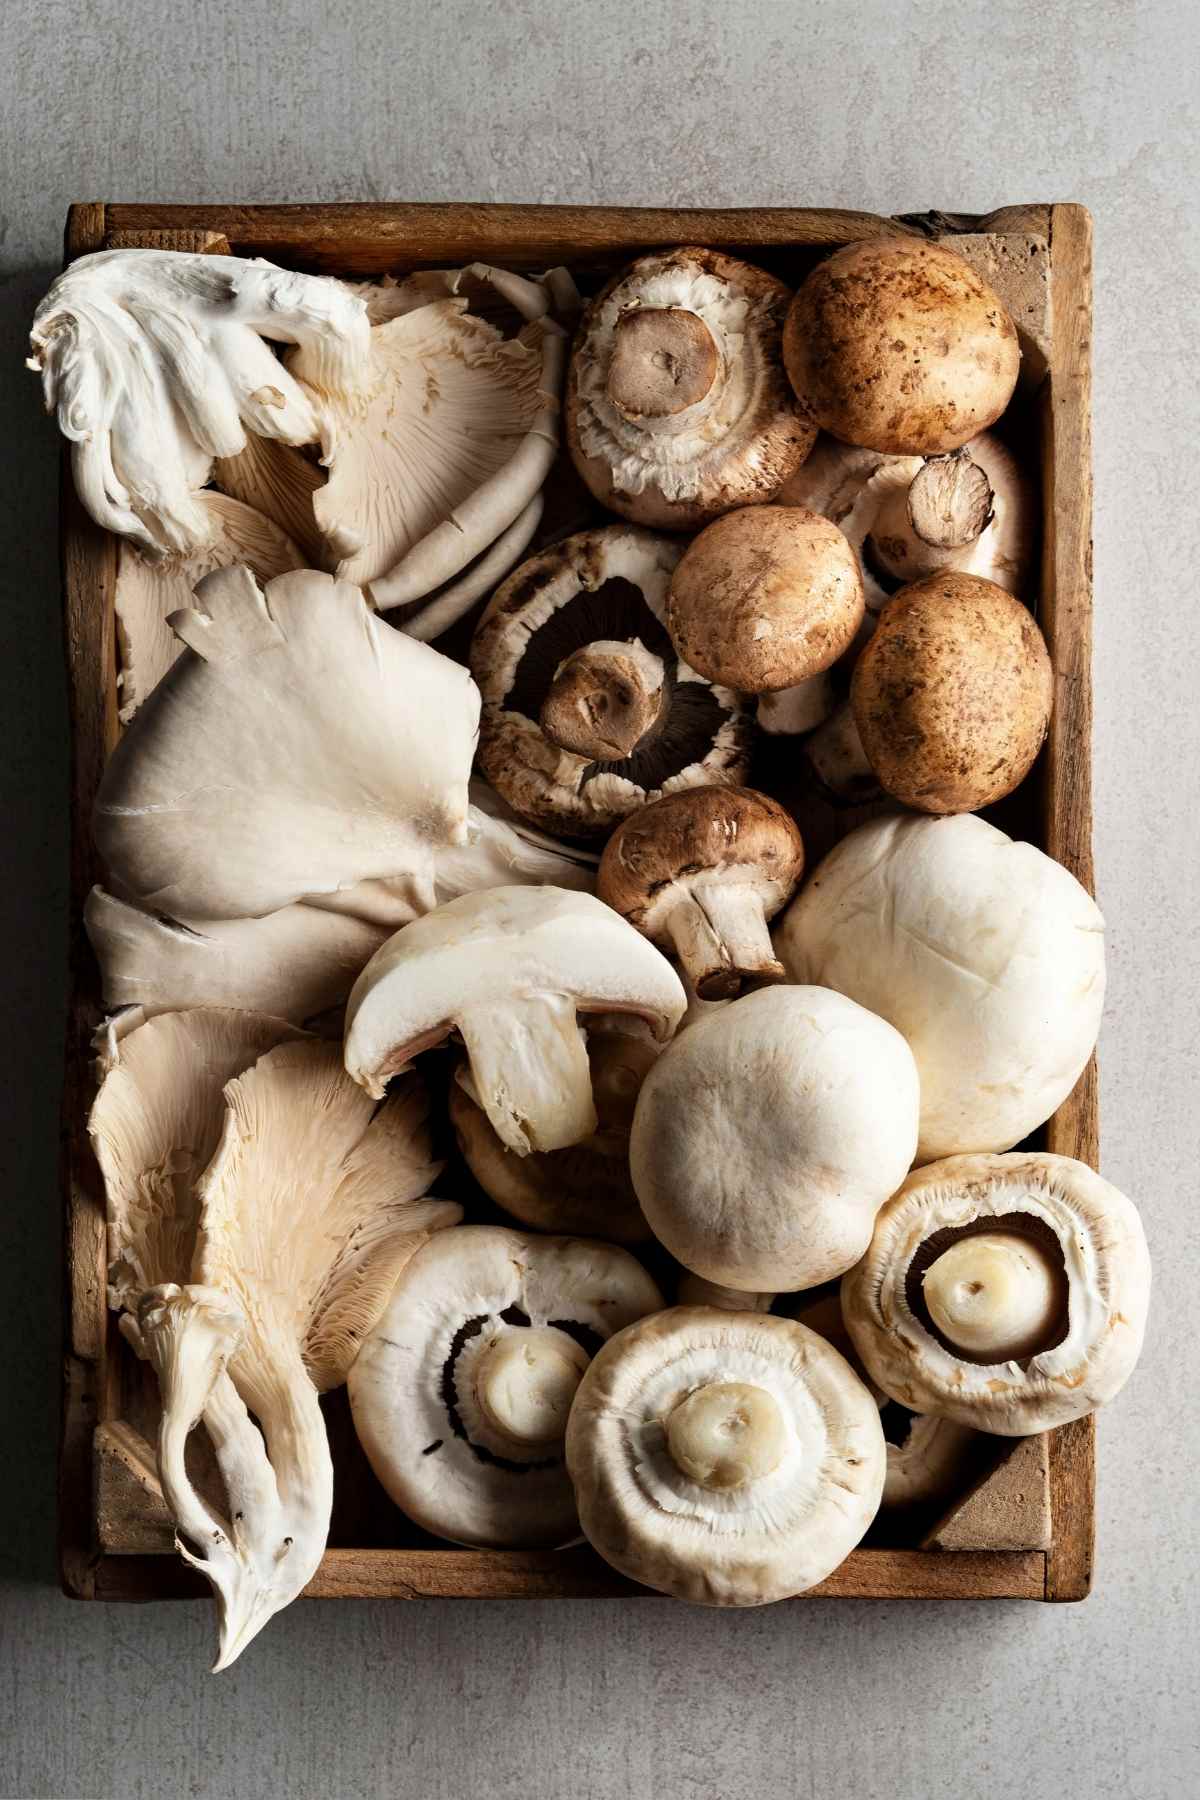 Mushrooms are a delicious addition to dishes but they can spoil quickly. In this post we’re taking a closer look at mushrooms, and how to tell if they’ve gone bad.